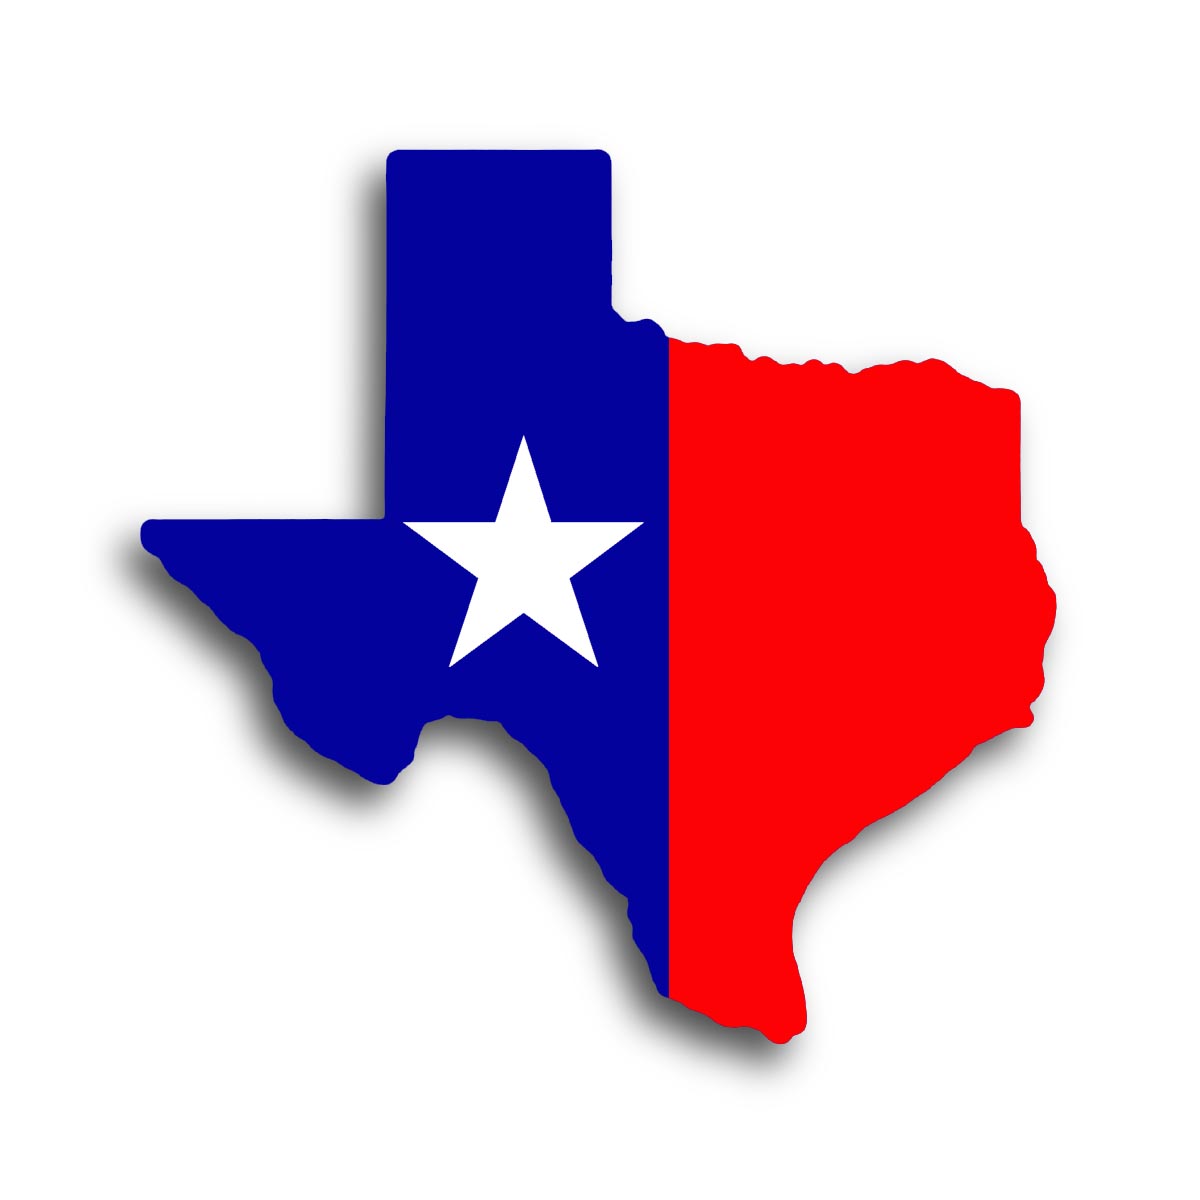 Texas Outline Clipart - Free Clipart Images